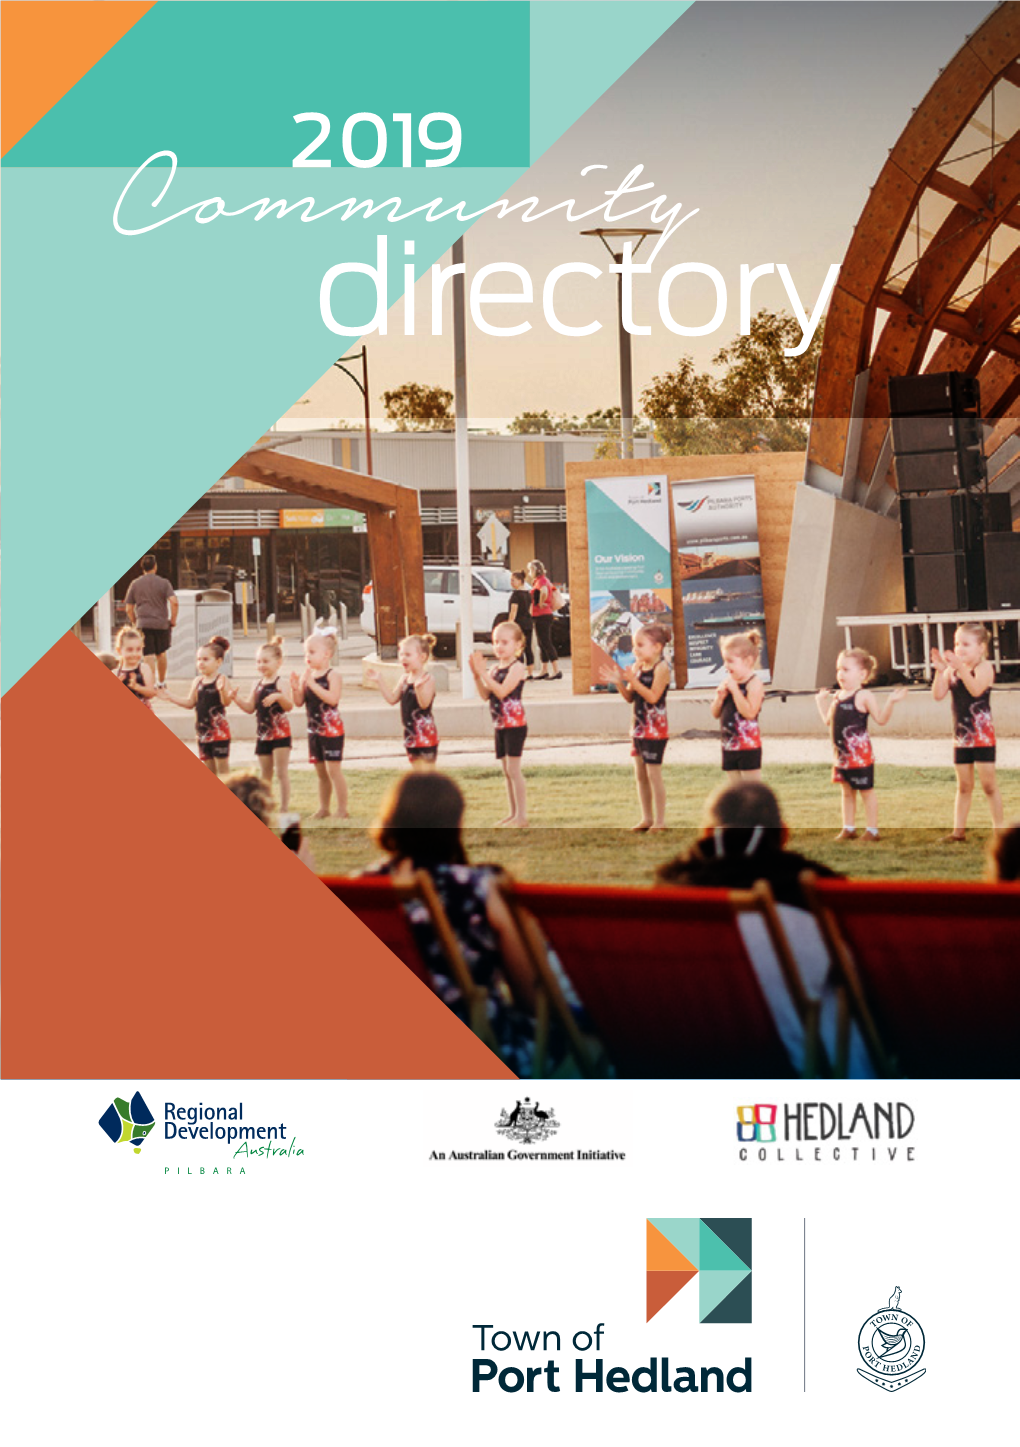 Town of Port Hedland Asks Community Groups to Keep Us Informed of Any Changes Relating to Their Organisation’S Details